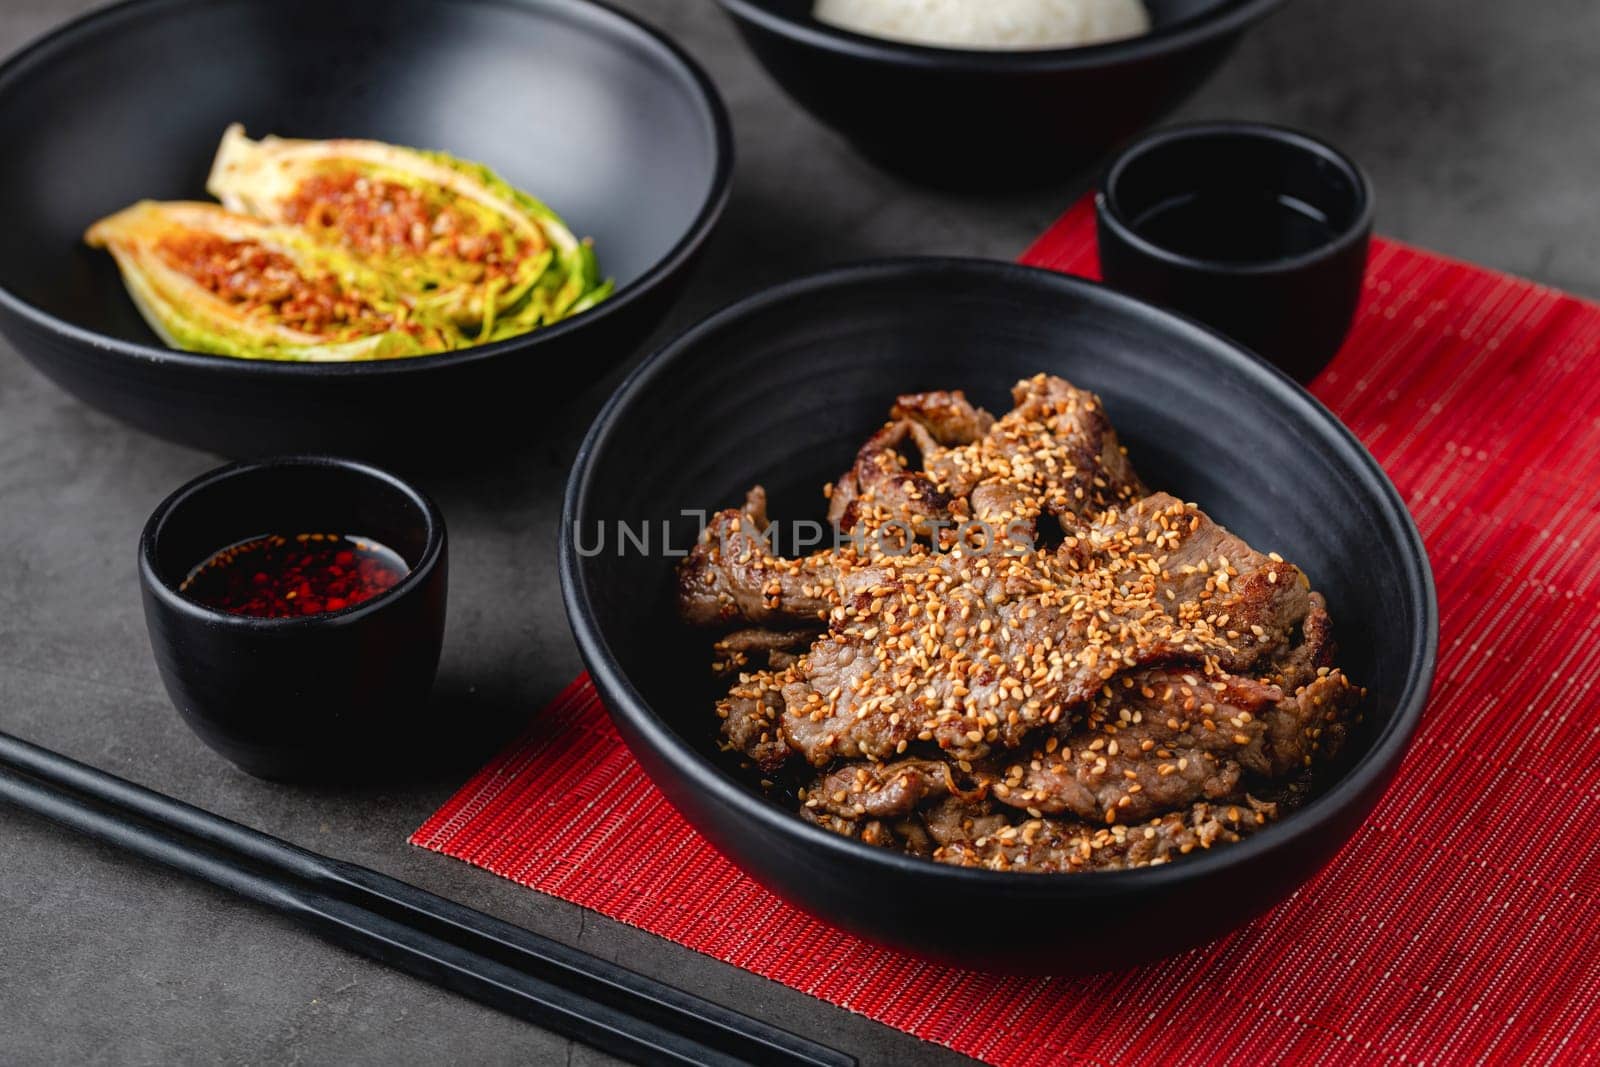 Beef bulgogi with vegetables, sauce and rice pilaf by Sonat